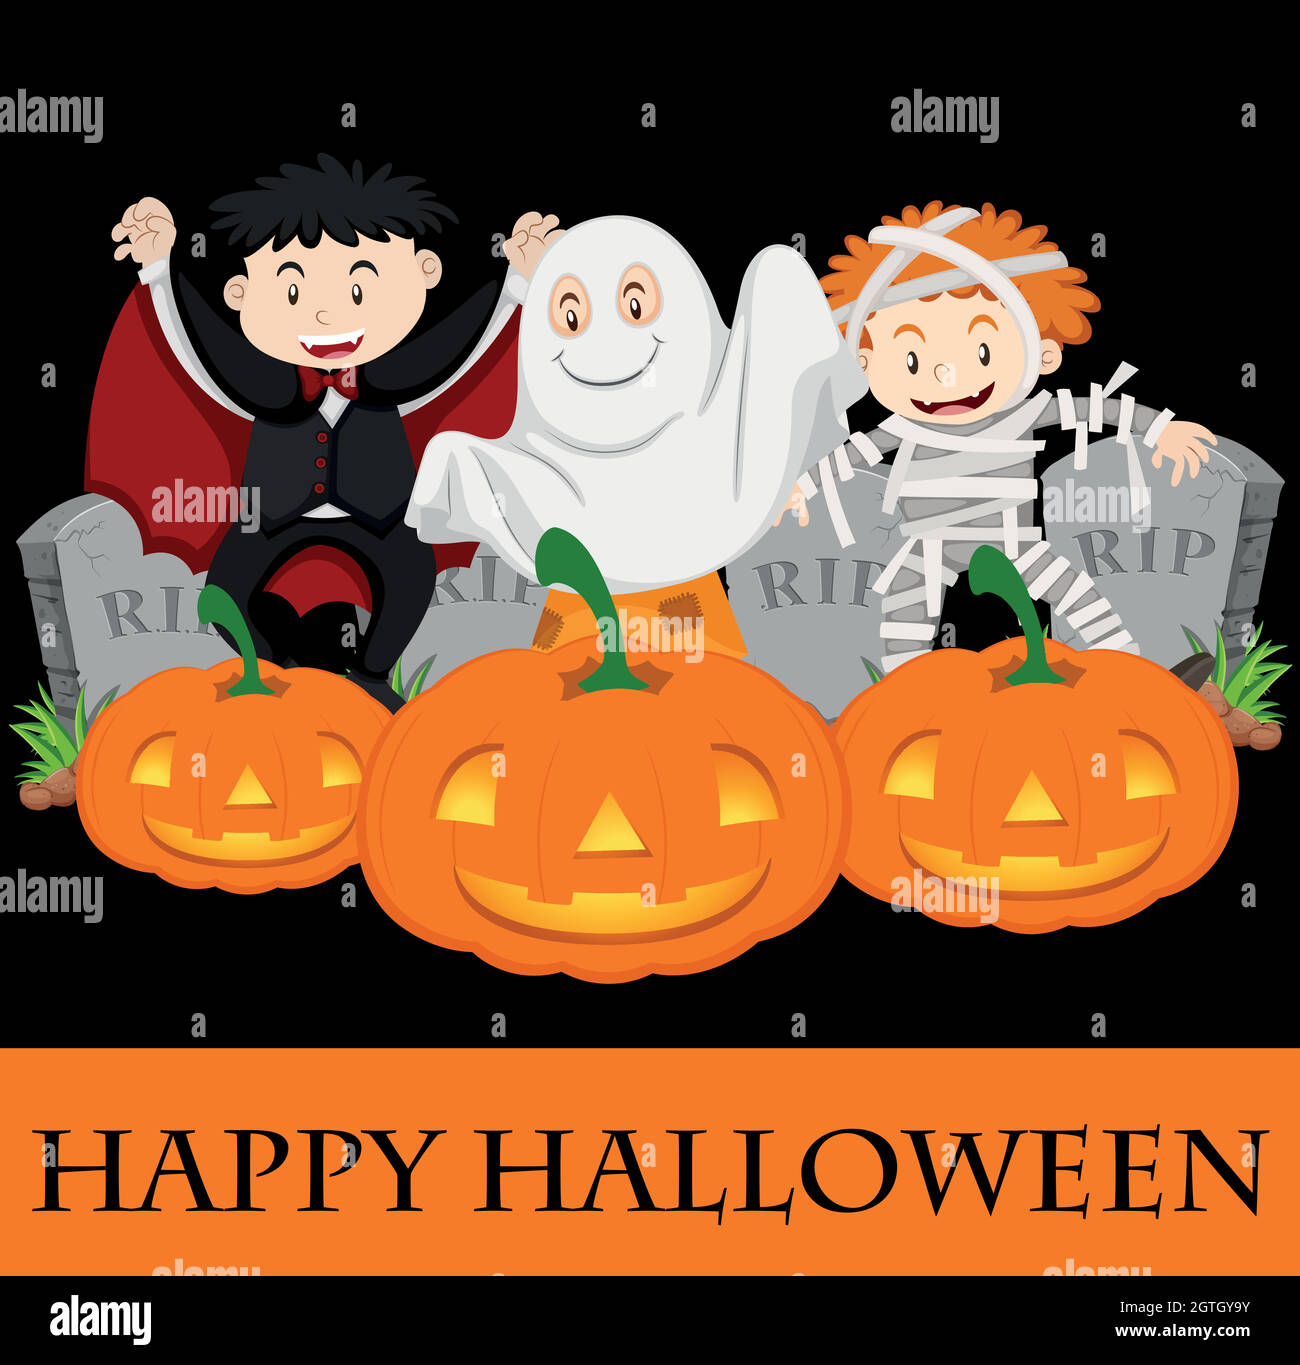 Happy Halloween card template with kids in costume Stock Vector